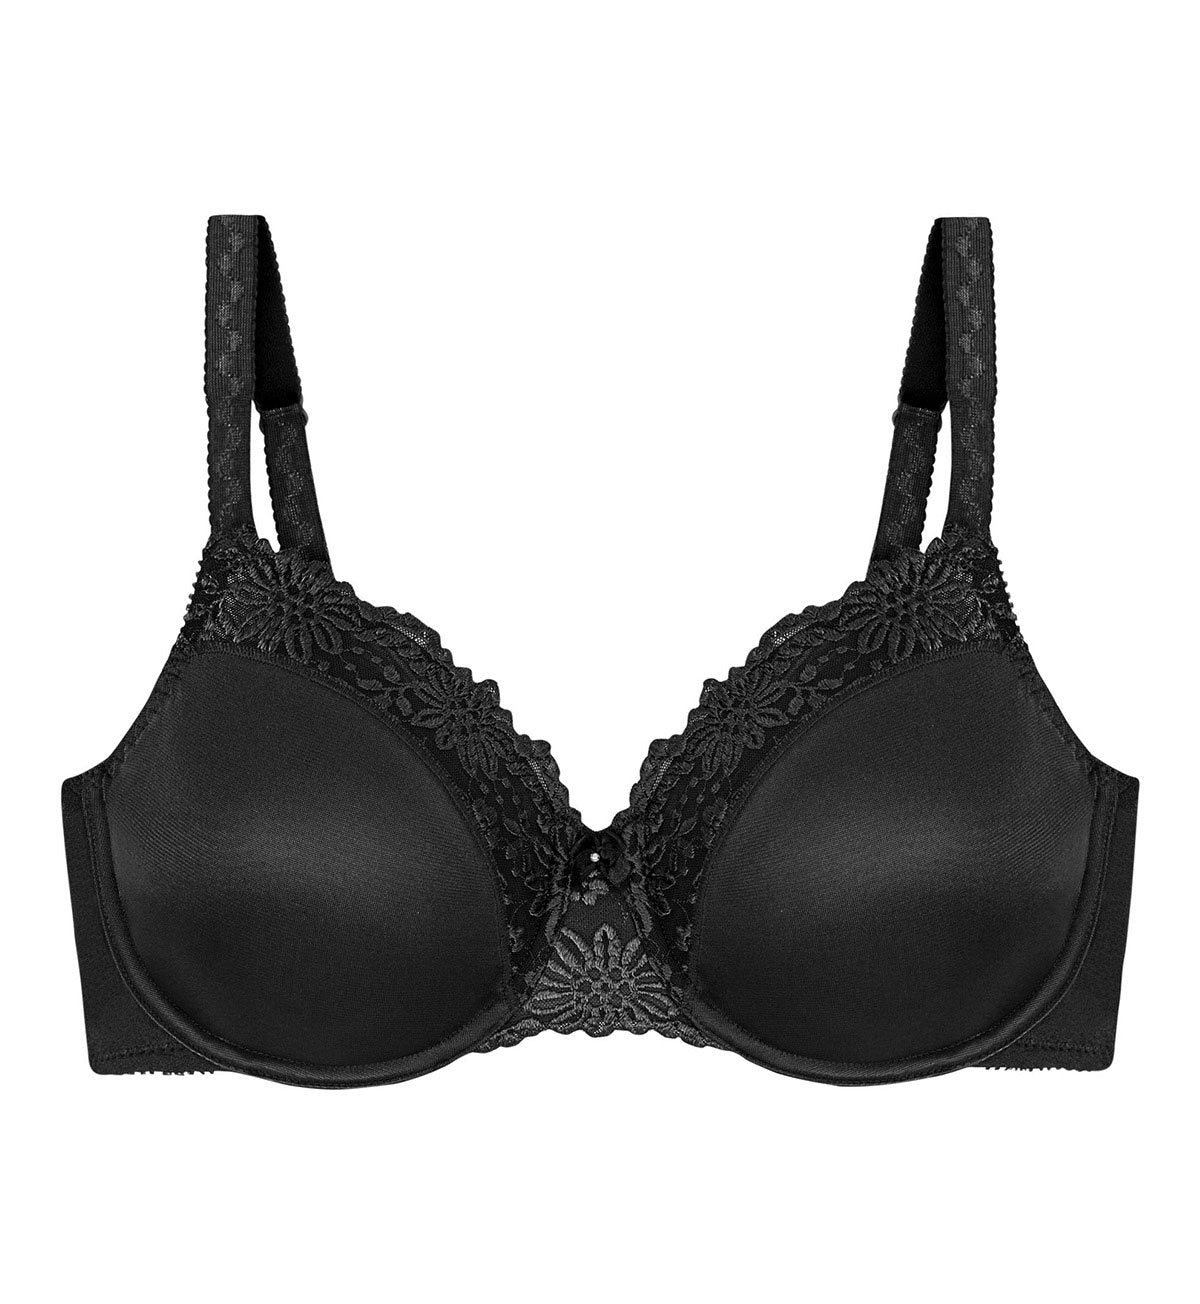 Beauforme Bra size 36E firm control soft cup unpadded non wired satin cup  Black